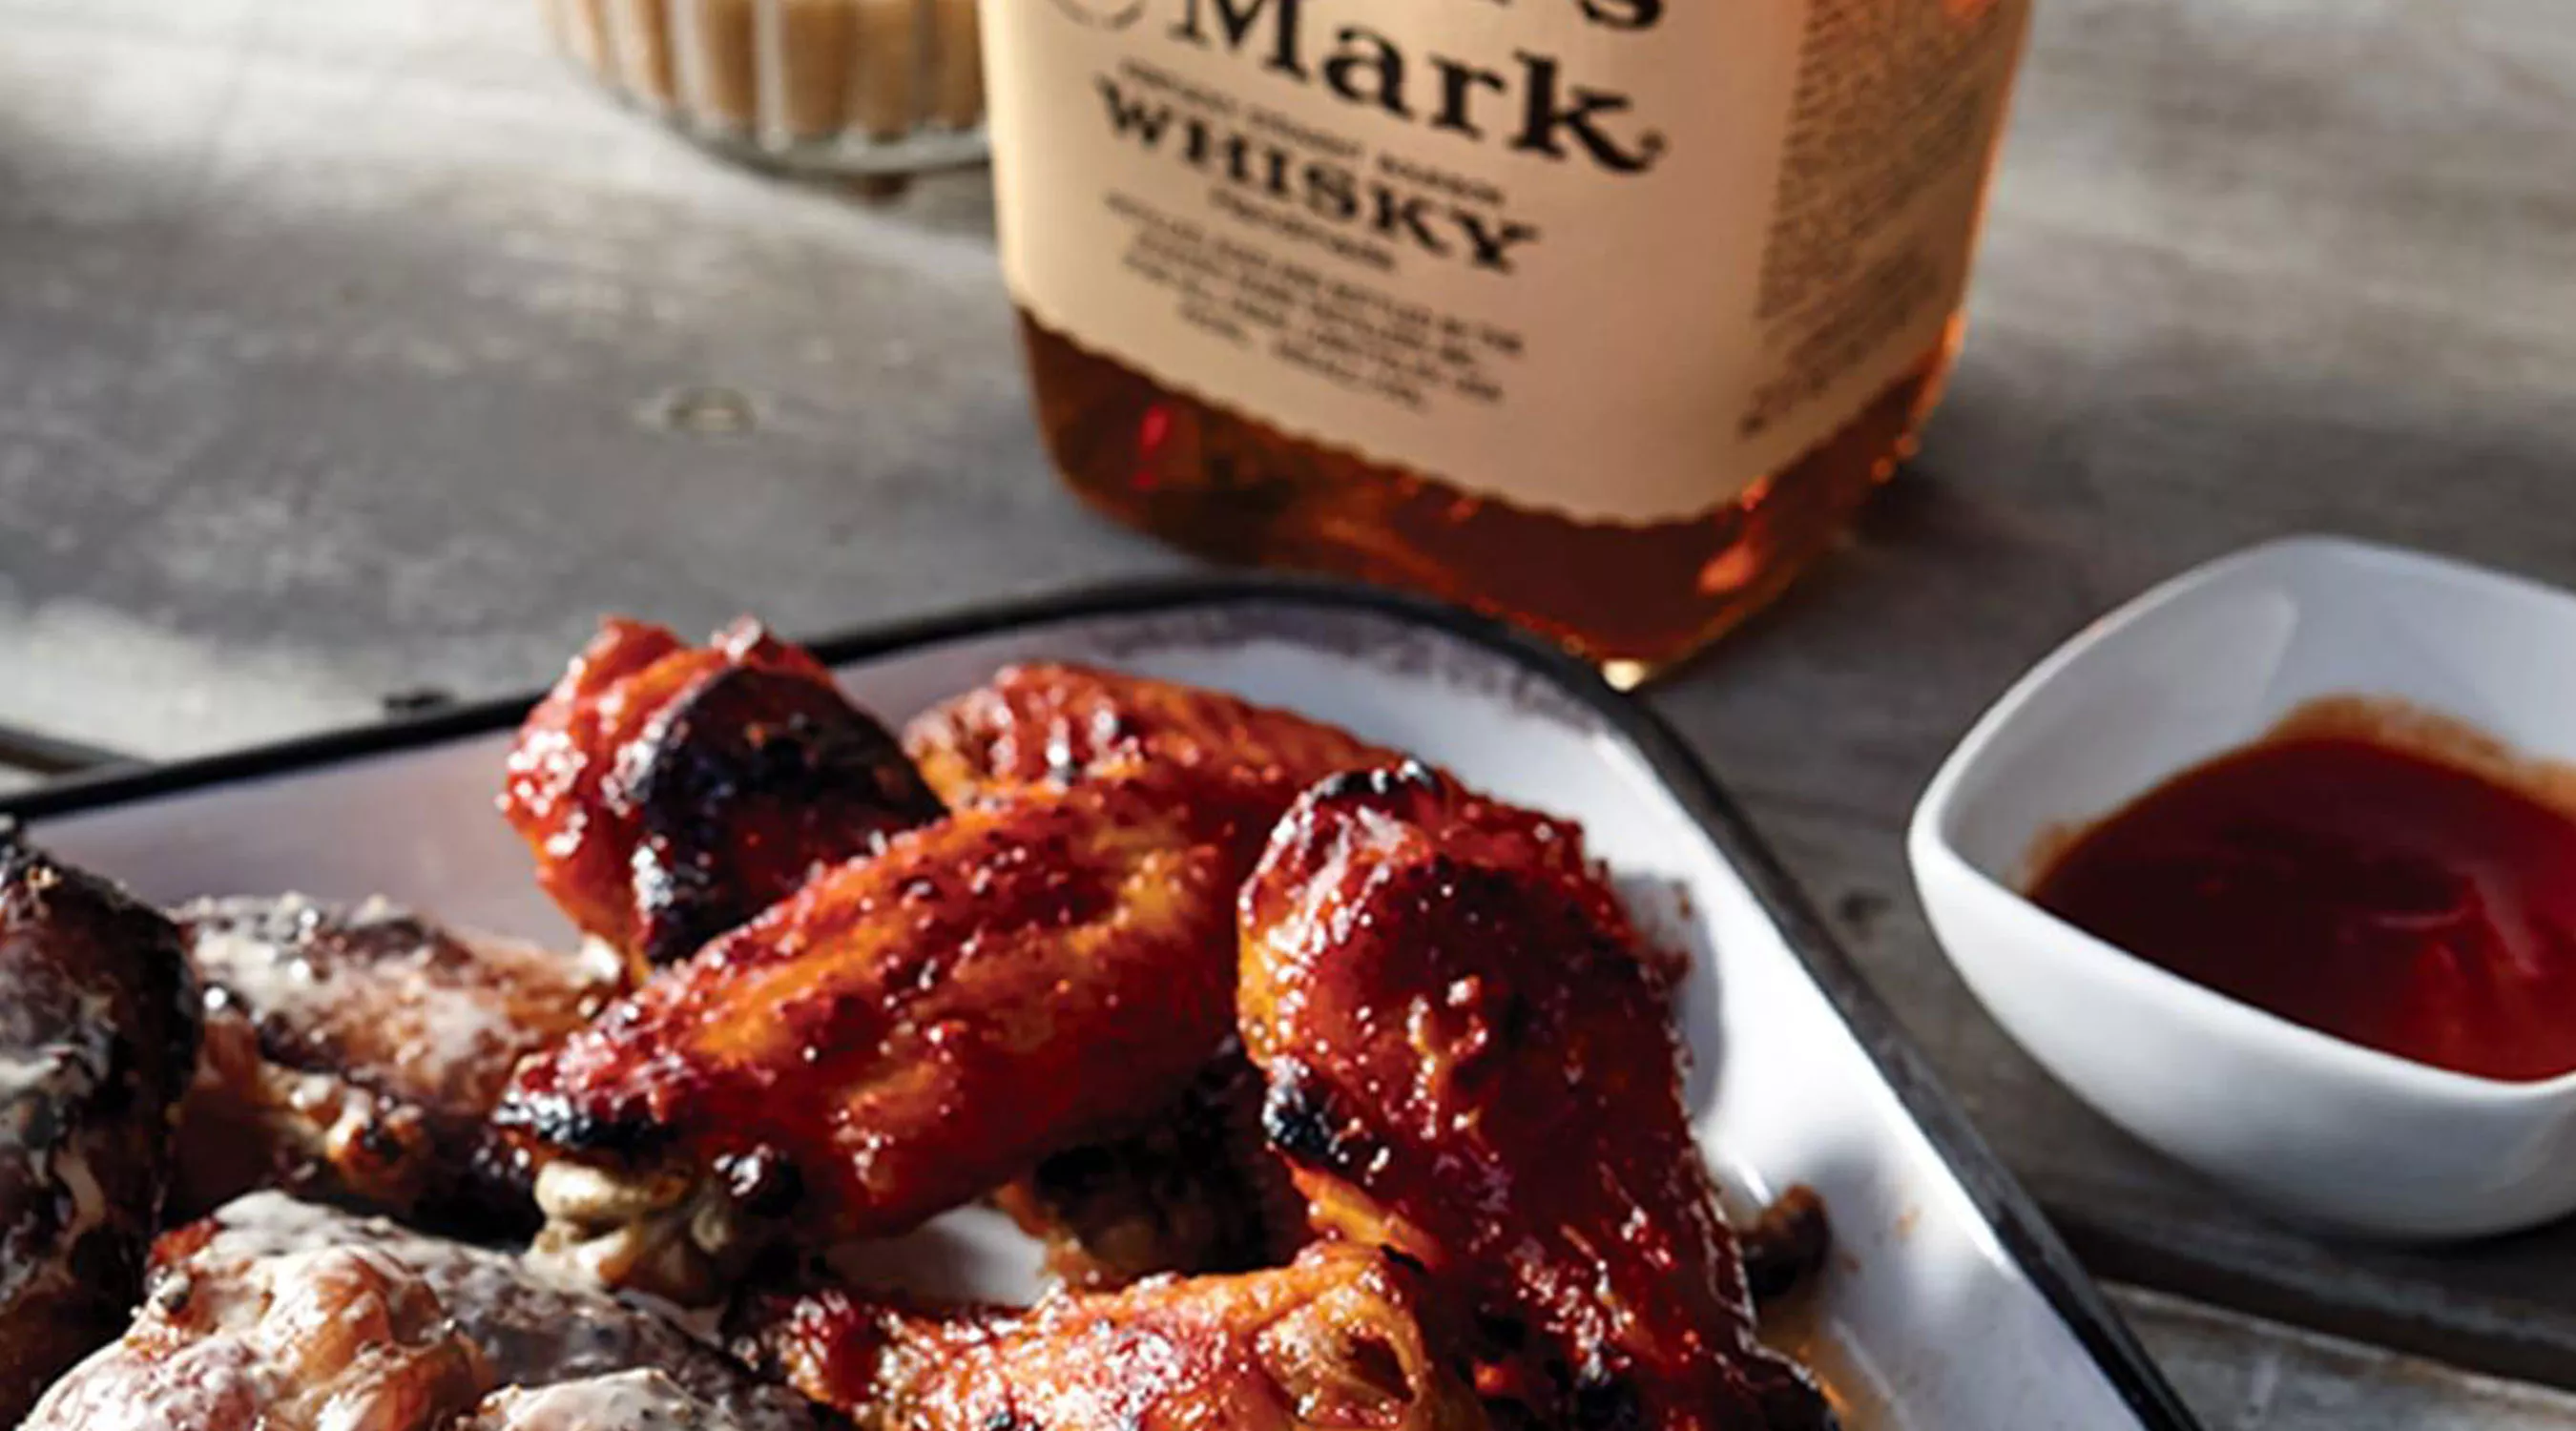 Baked chicken wings on a white platter next to a bottle of Maker's Mark.